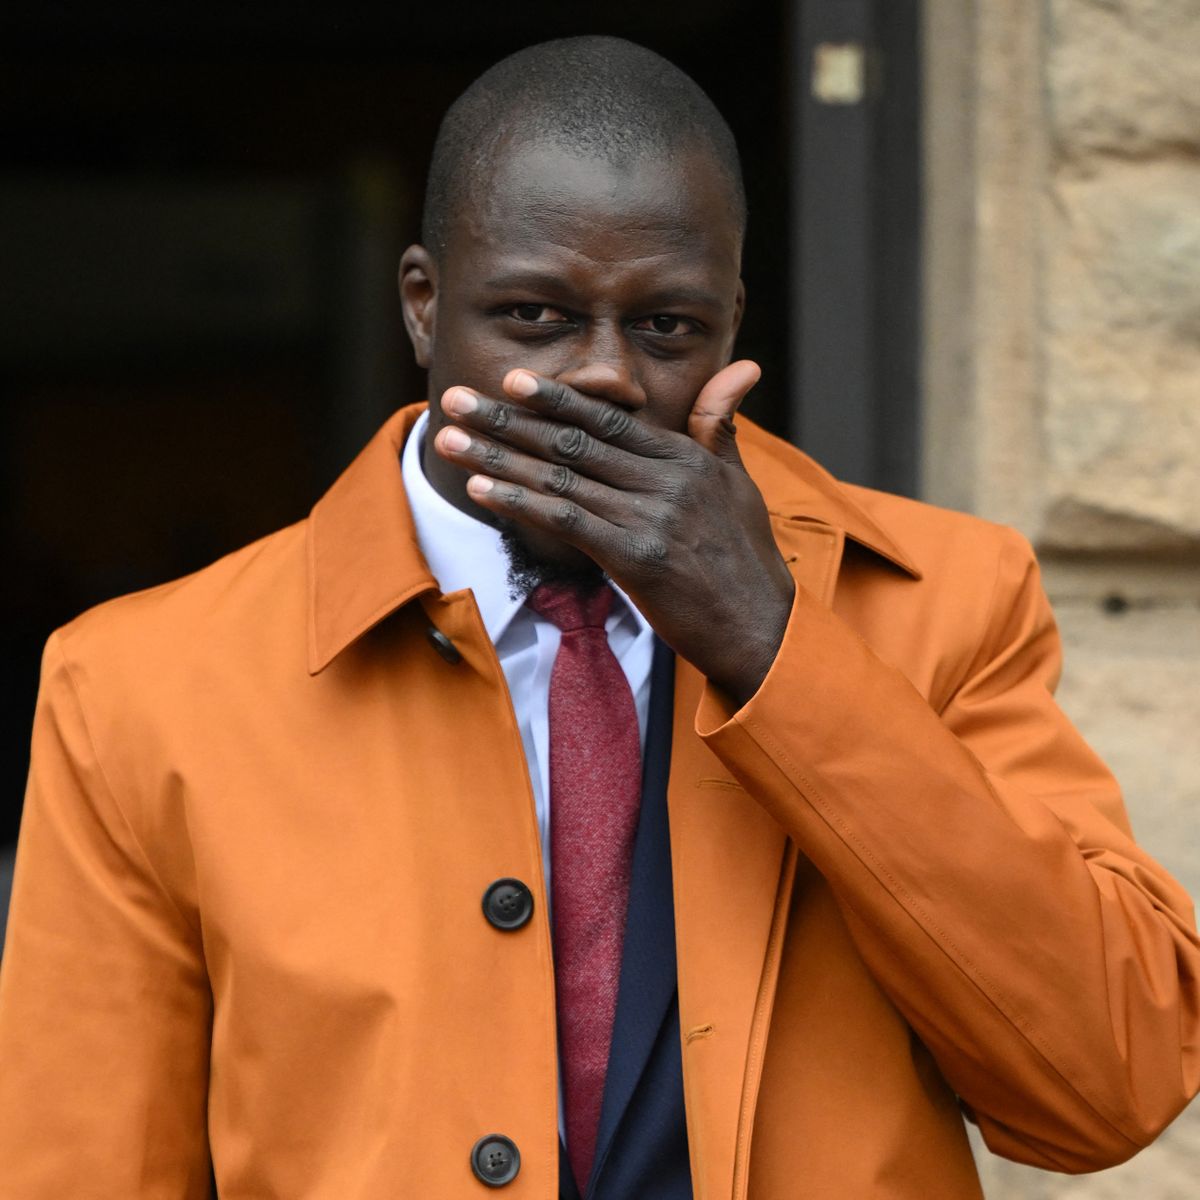 Benjamin Mendy weeps in court as he's cleared of all charges in rape trial